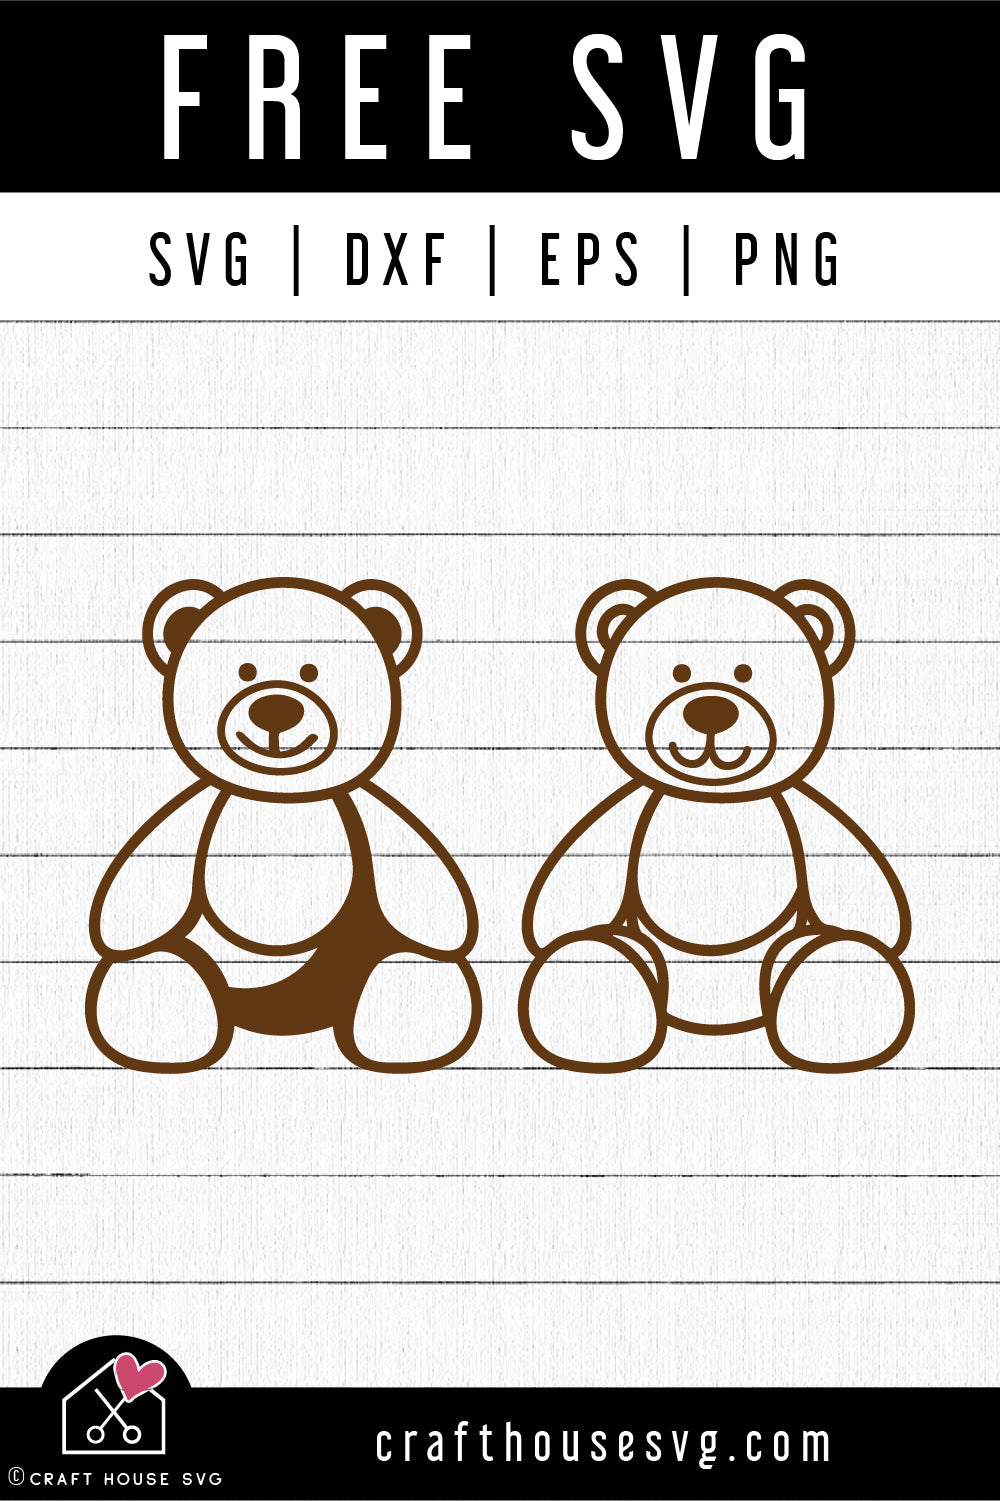 Teddy Bear SVG File: Instant Download for Cricut, Silhouette & Laser  Machines